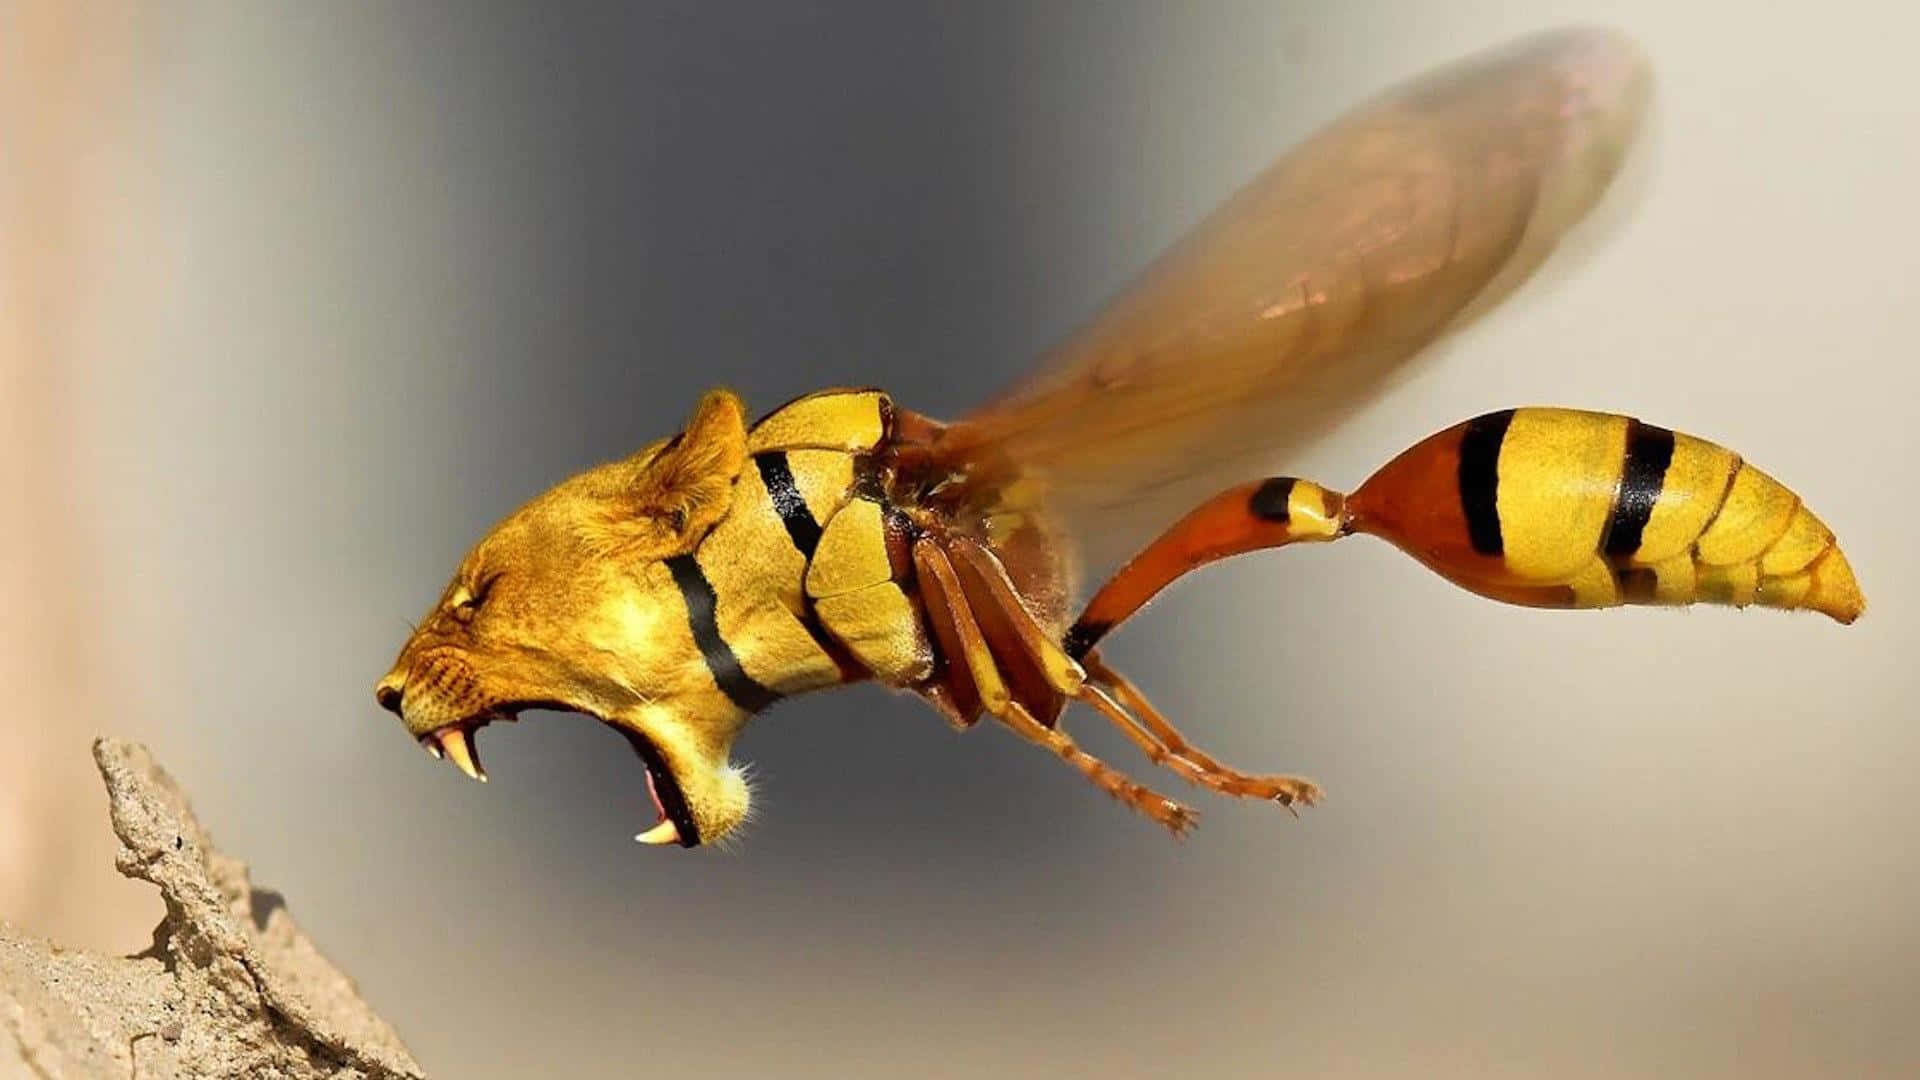 Preposterous Tiger Insect Wallpaper